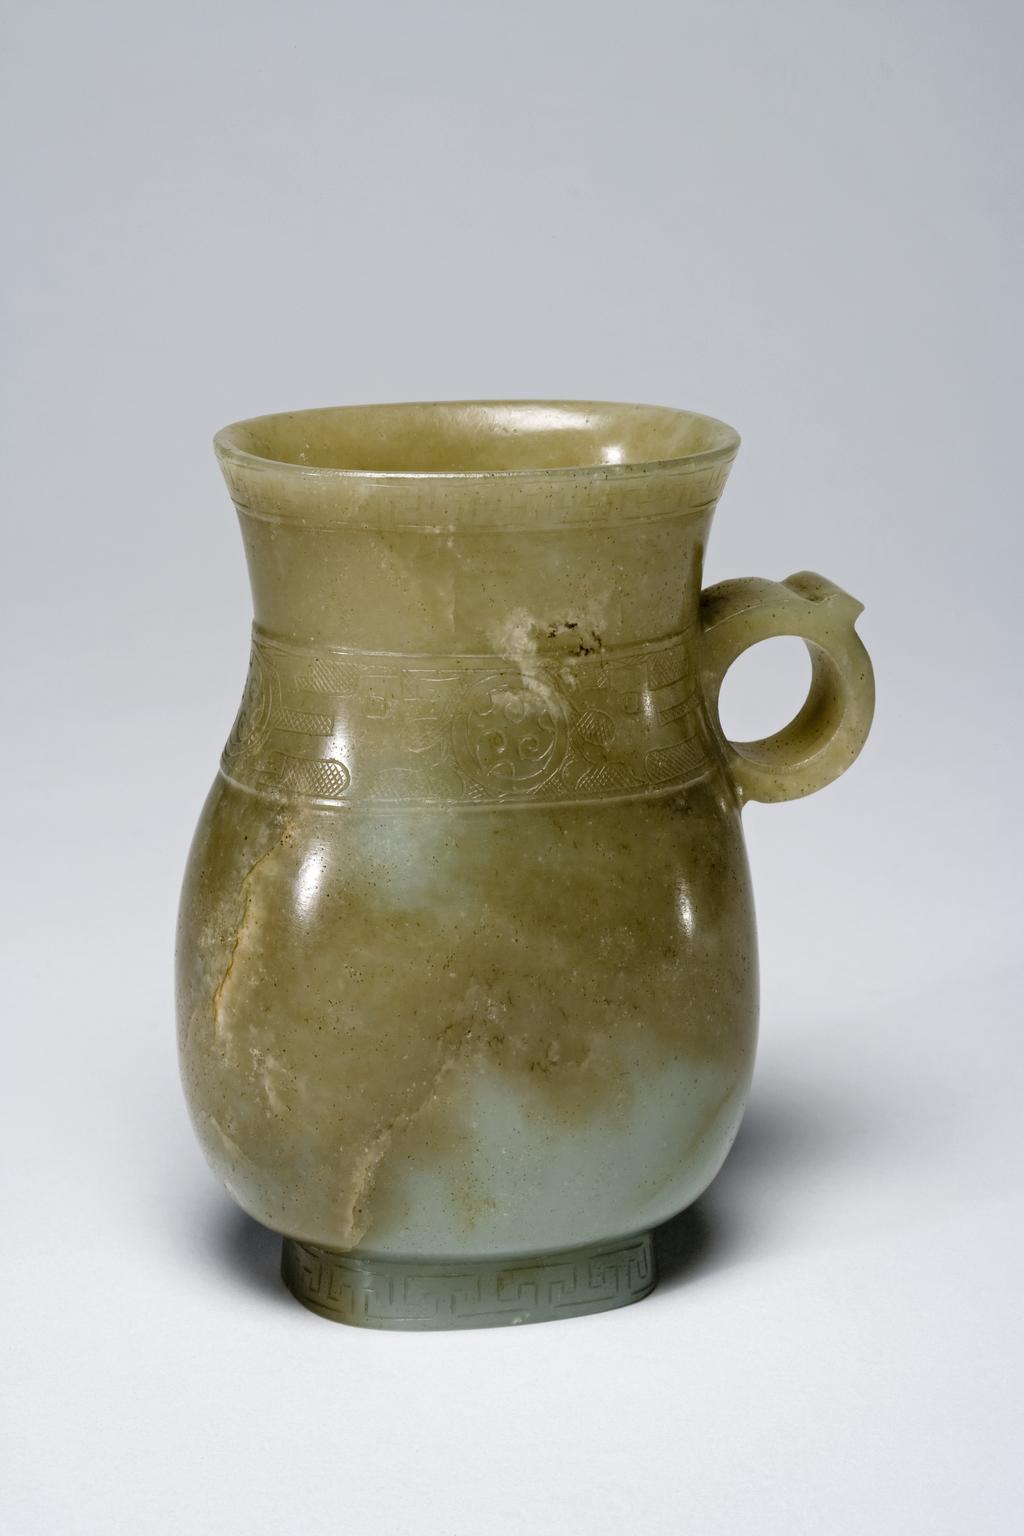 An image of Tankard/Jug. Decorated with a band of archaistic bronze motif around the neck. Pale taupe nephrite with incised decoration. Of oval baluster form with a ring handle and oval footring. Decorated round the rim with a narrow band of key ornament and at the level of the handle with a wider band of circles containing C-scrolls, and areas of hatching. The footring is decorated with key ornament. Height 10.6 cm. Probably Song Dynasty (960-1279). Chinese.